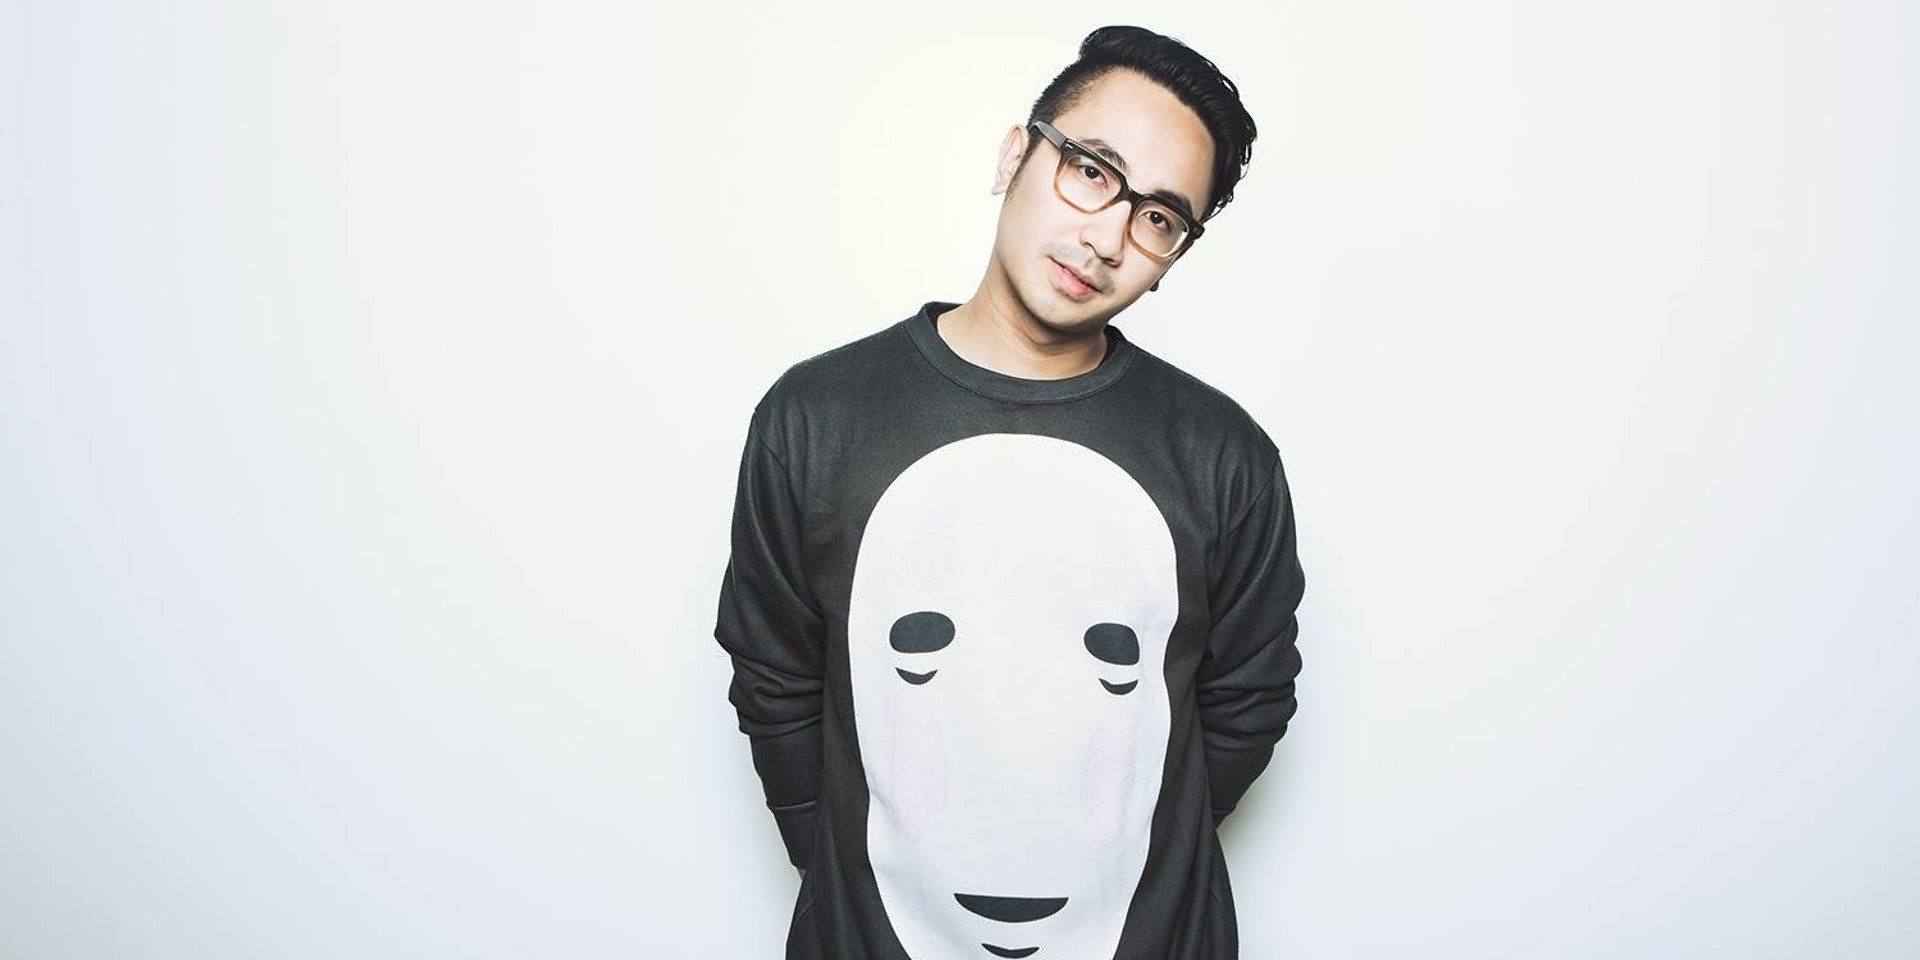 Filipino-American producer Sweater Beats set to perform at Black Market in February